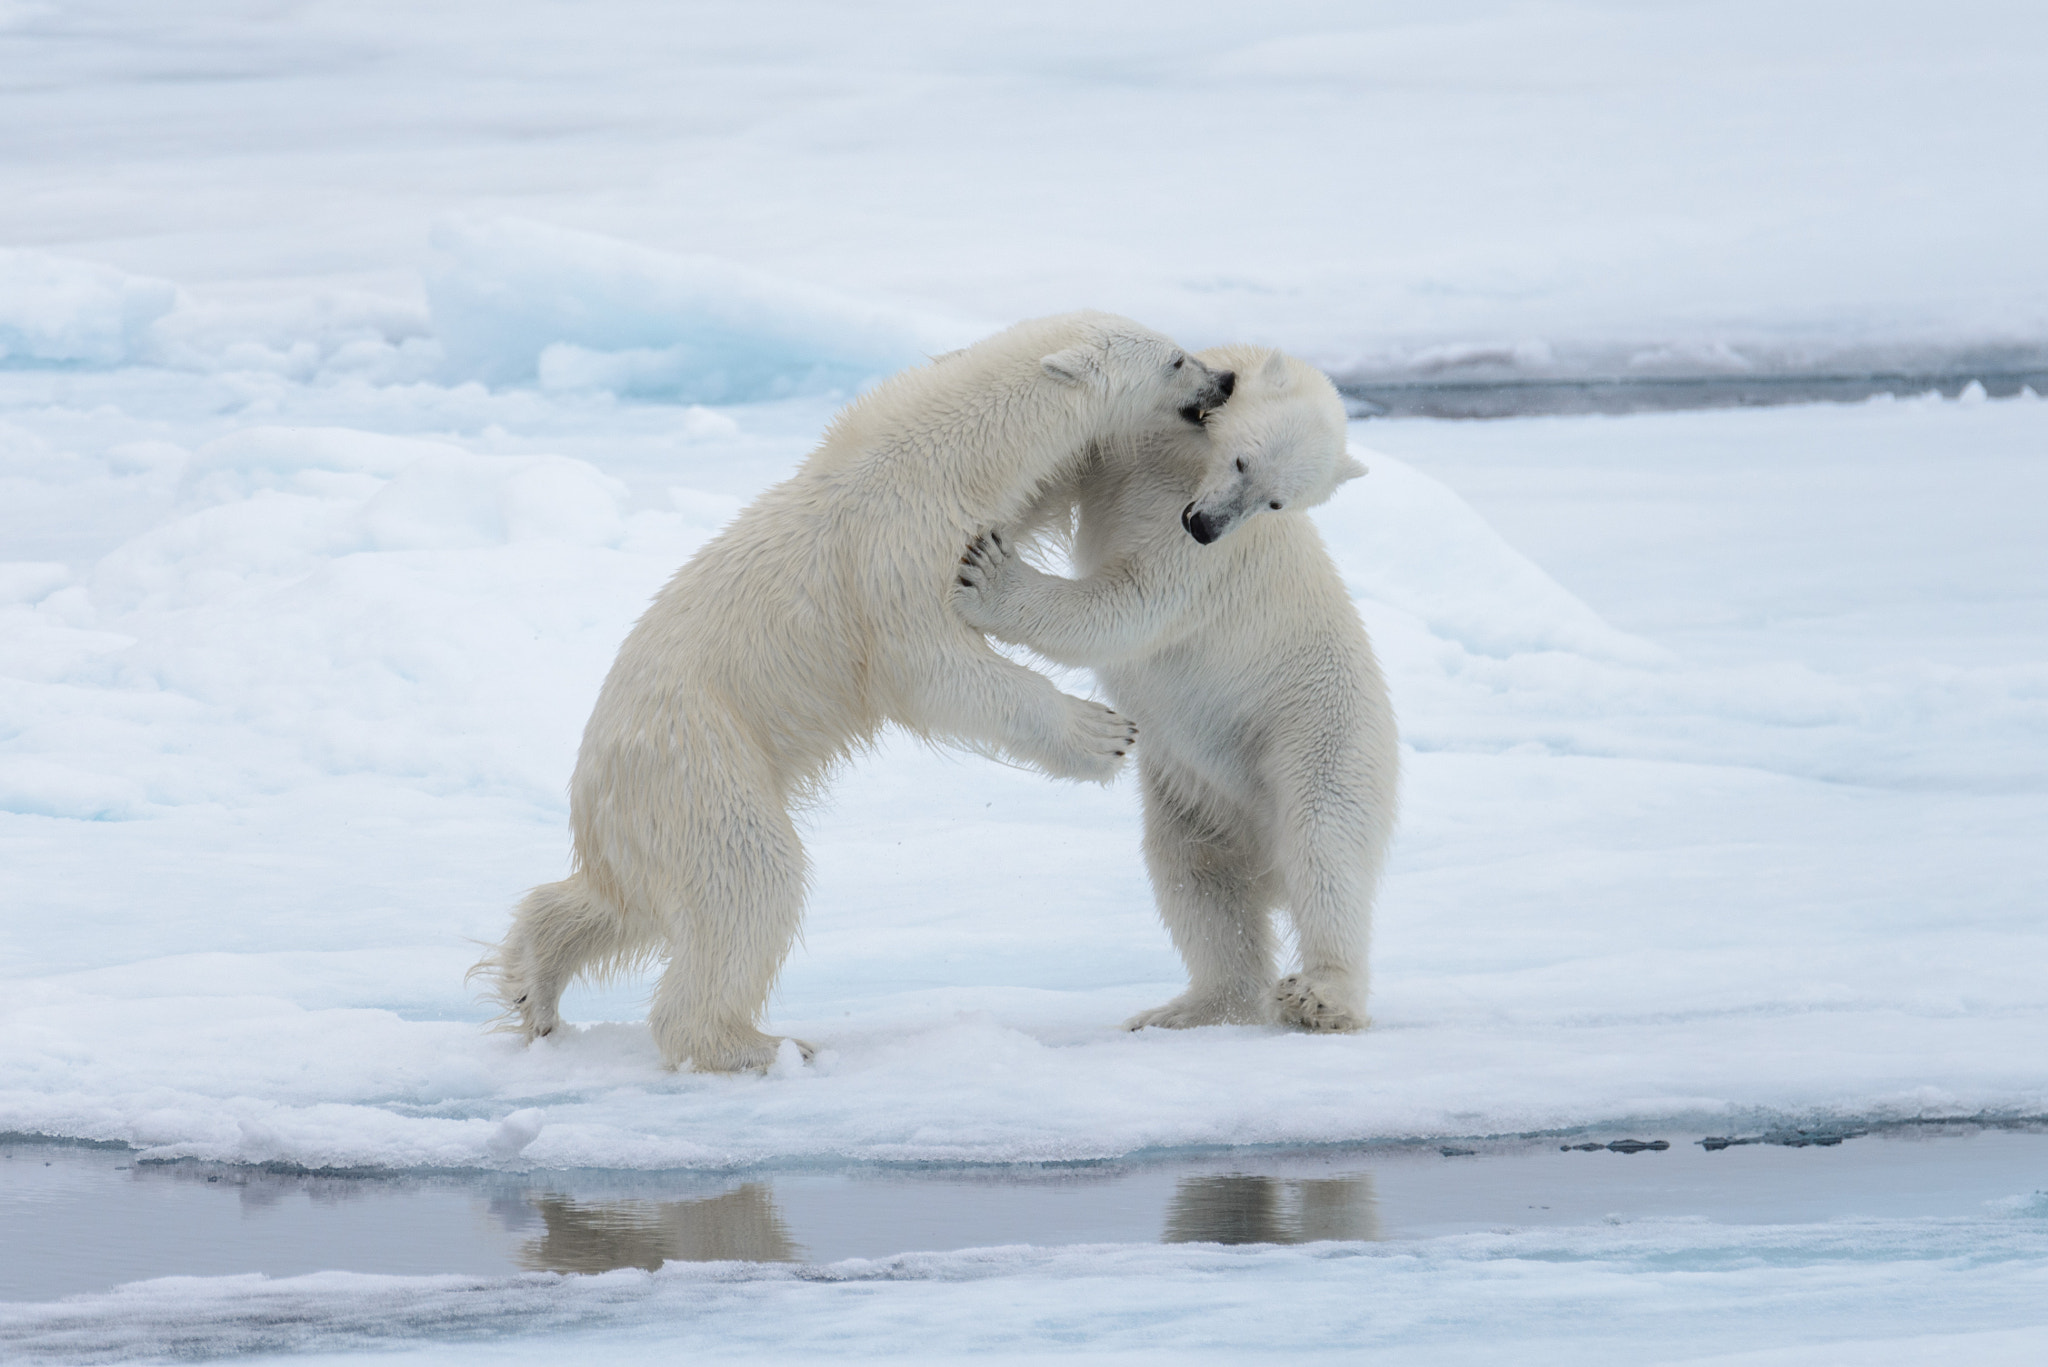 Two young wild polar bears playing on pack ice in Arctic sea, no